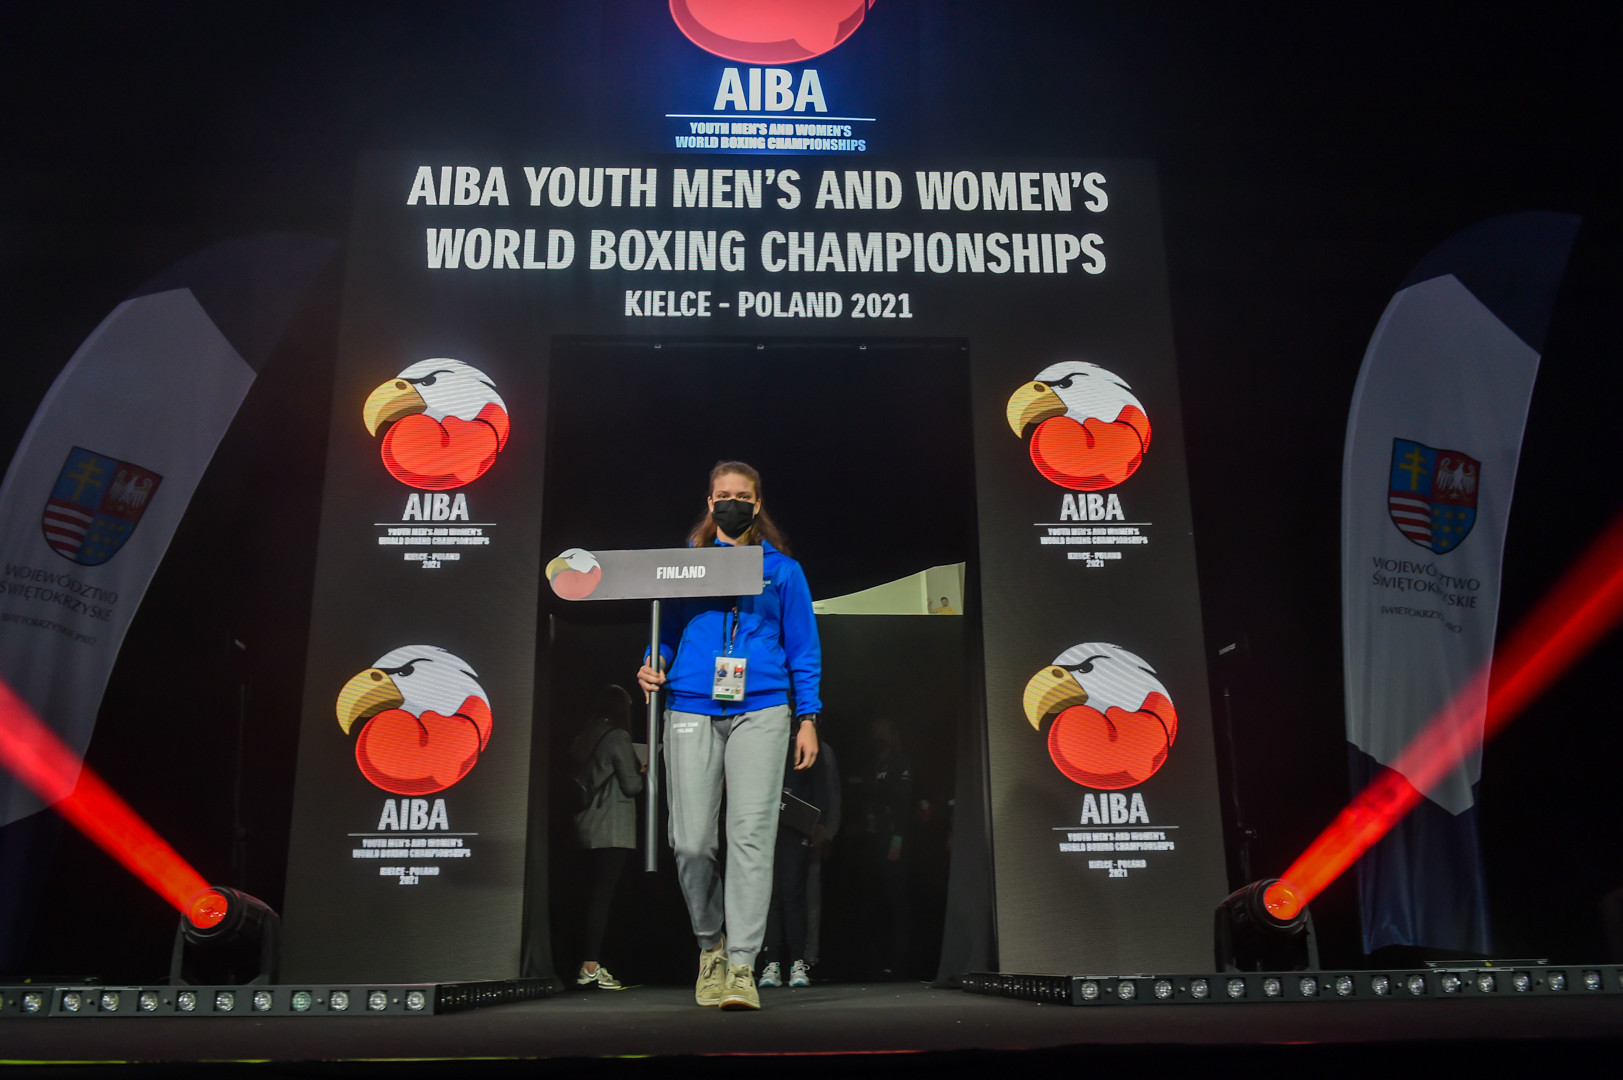 More than 400 boxers - male and female - are taking part in the Championships ©AIBA